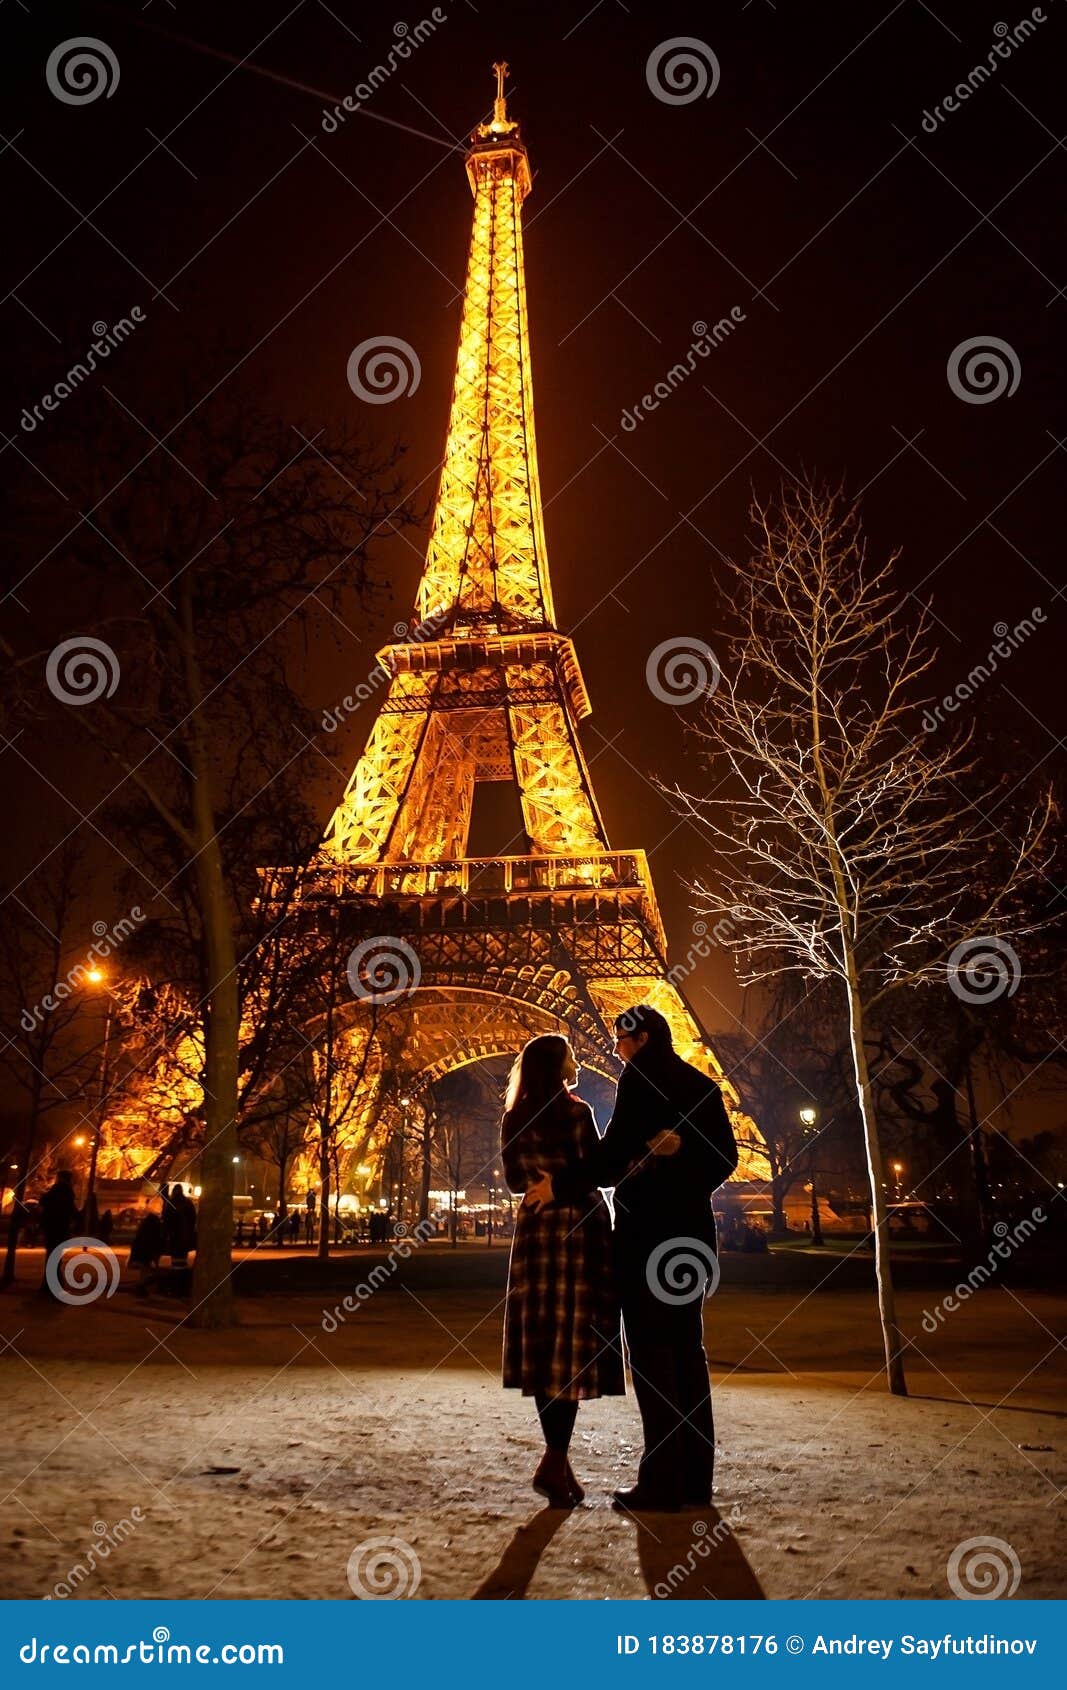 Lovers Near The Eiffel Tower Night In Paris Travel At Spring In France Editorial Photo Image Of Architecture Journey 183878176